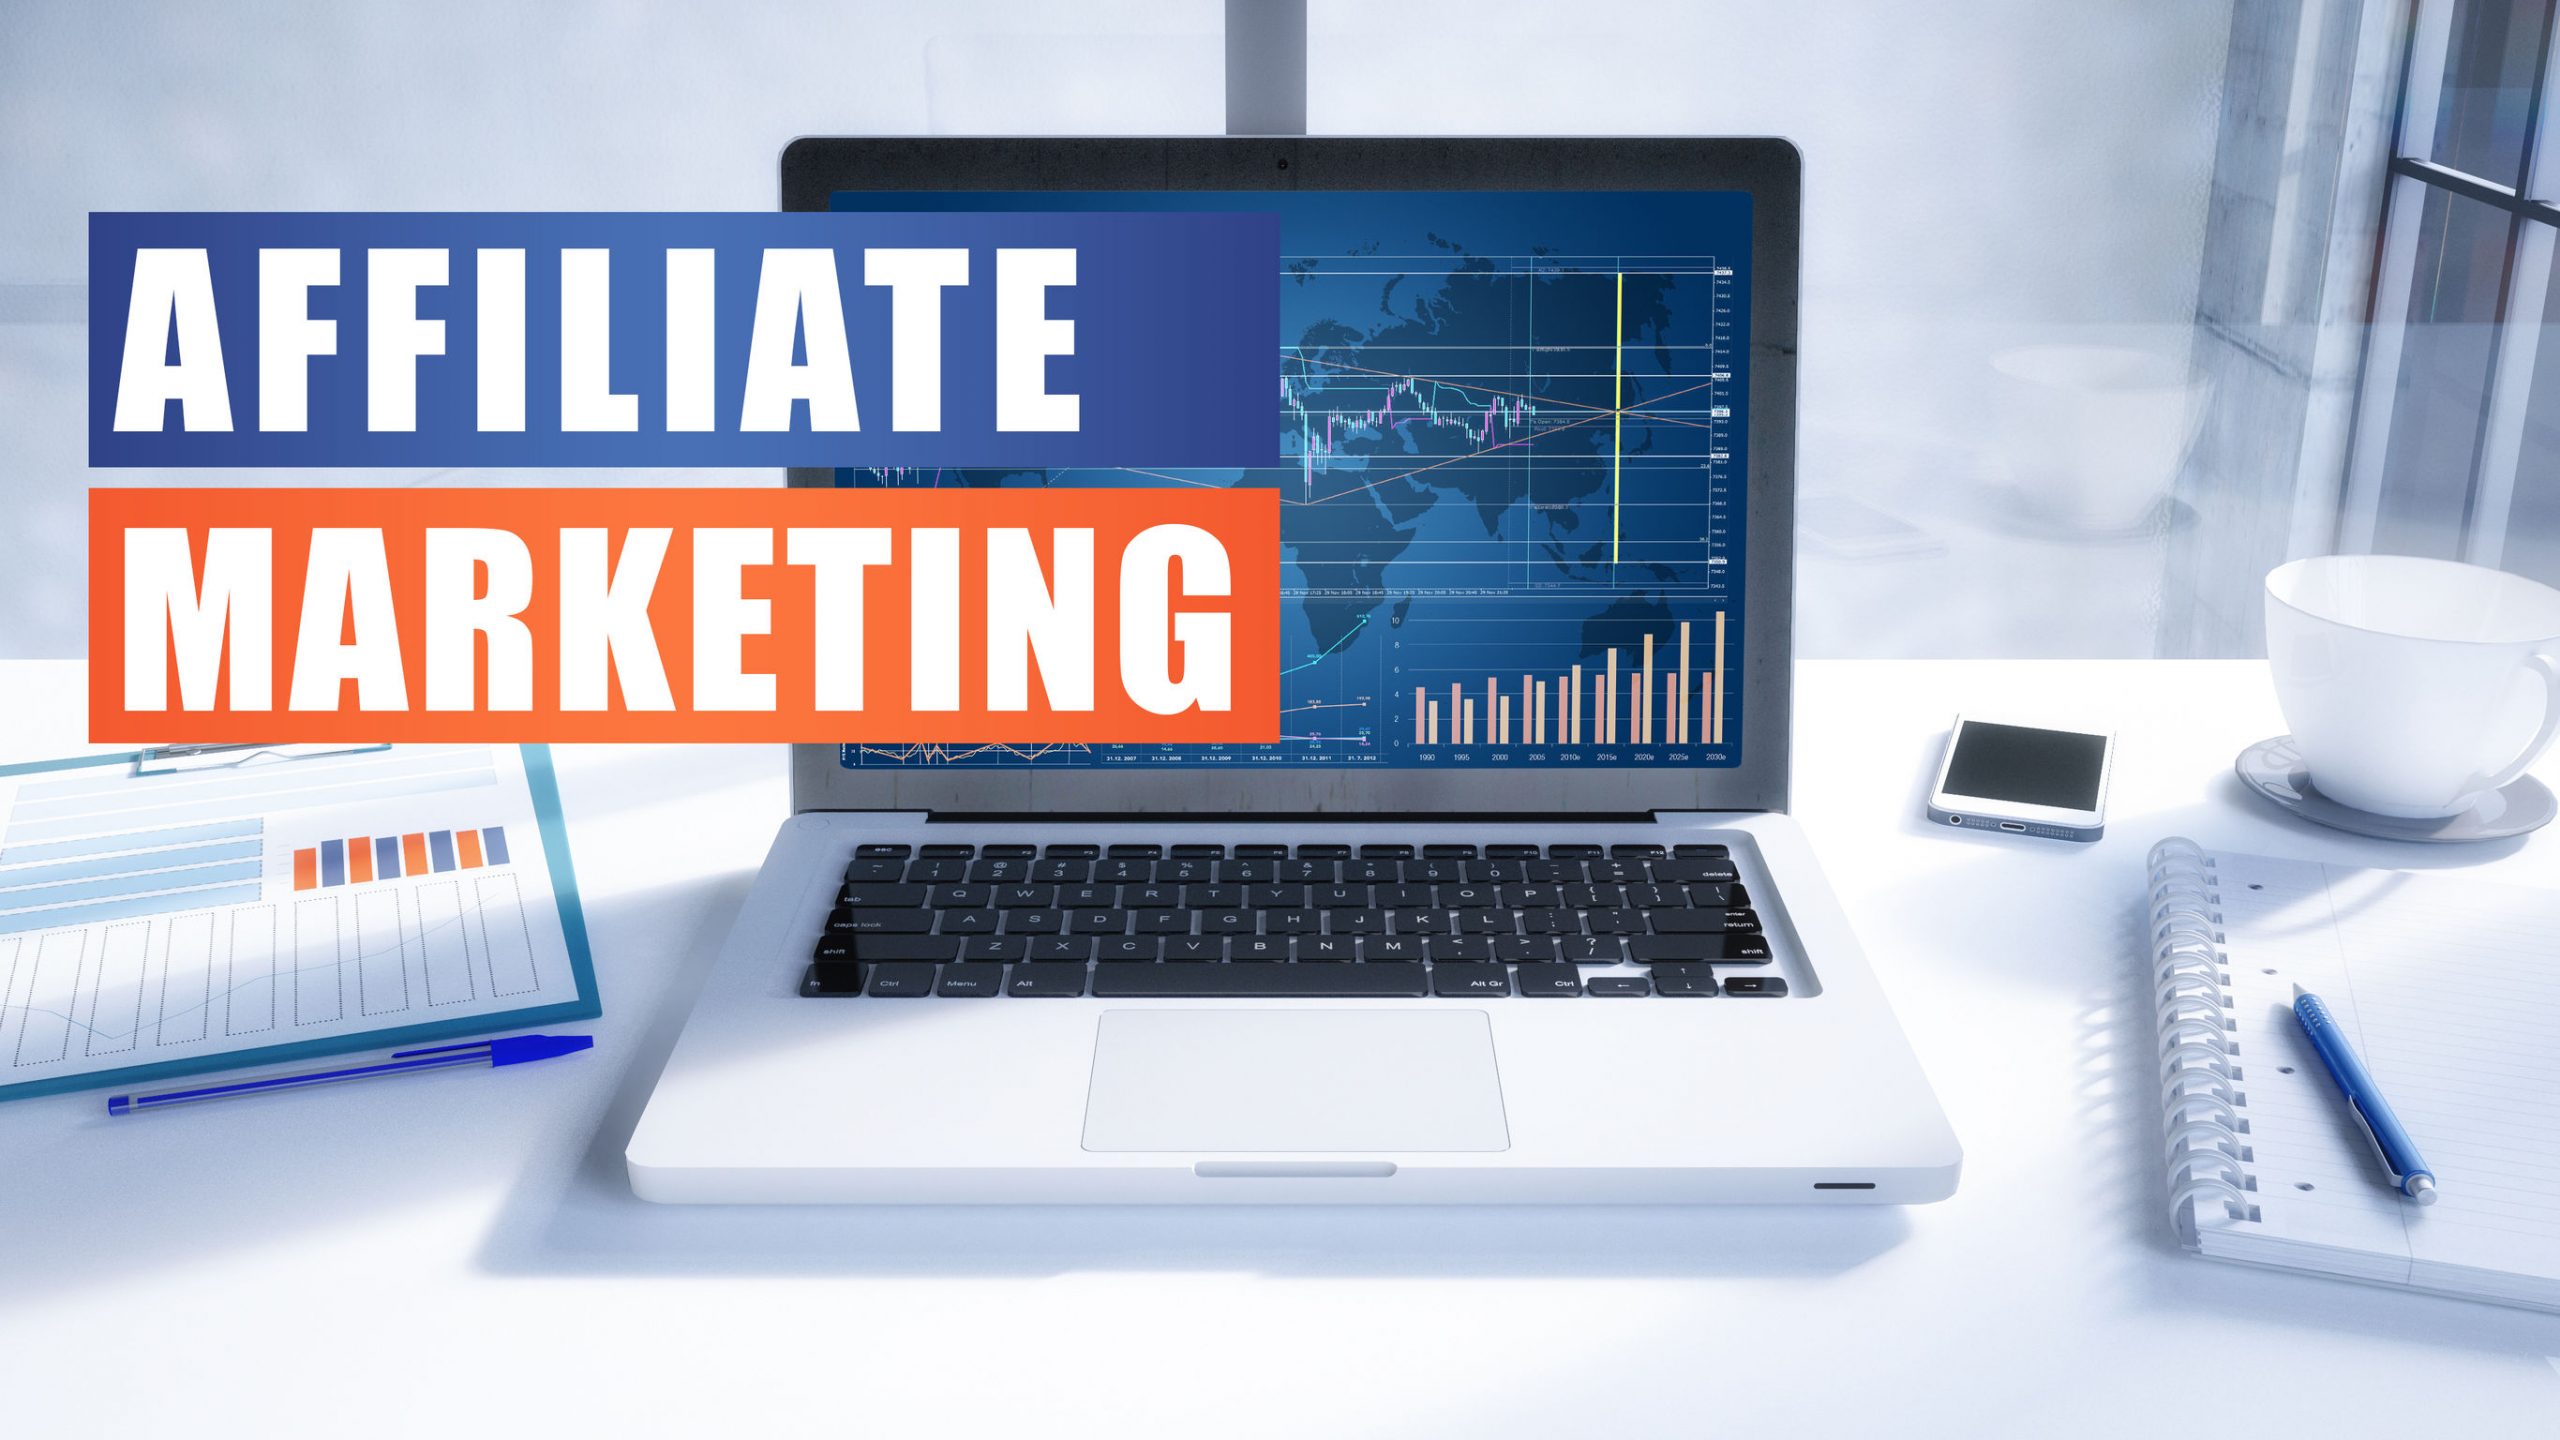 Affiliate marketing dating offers